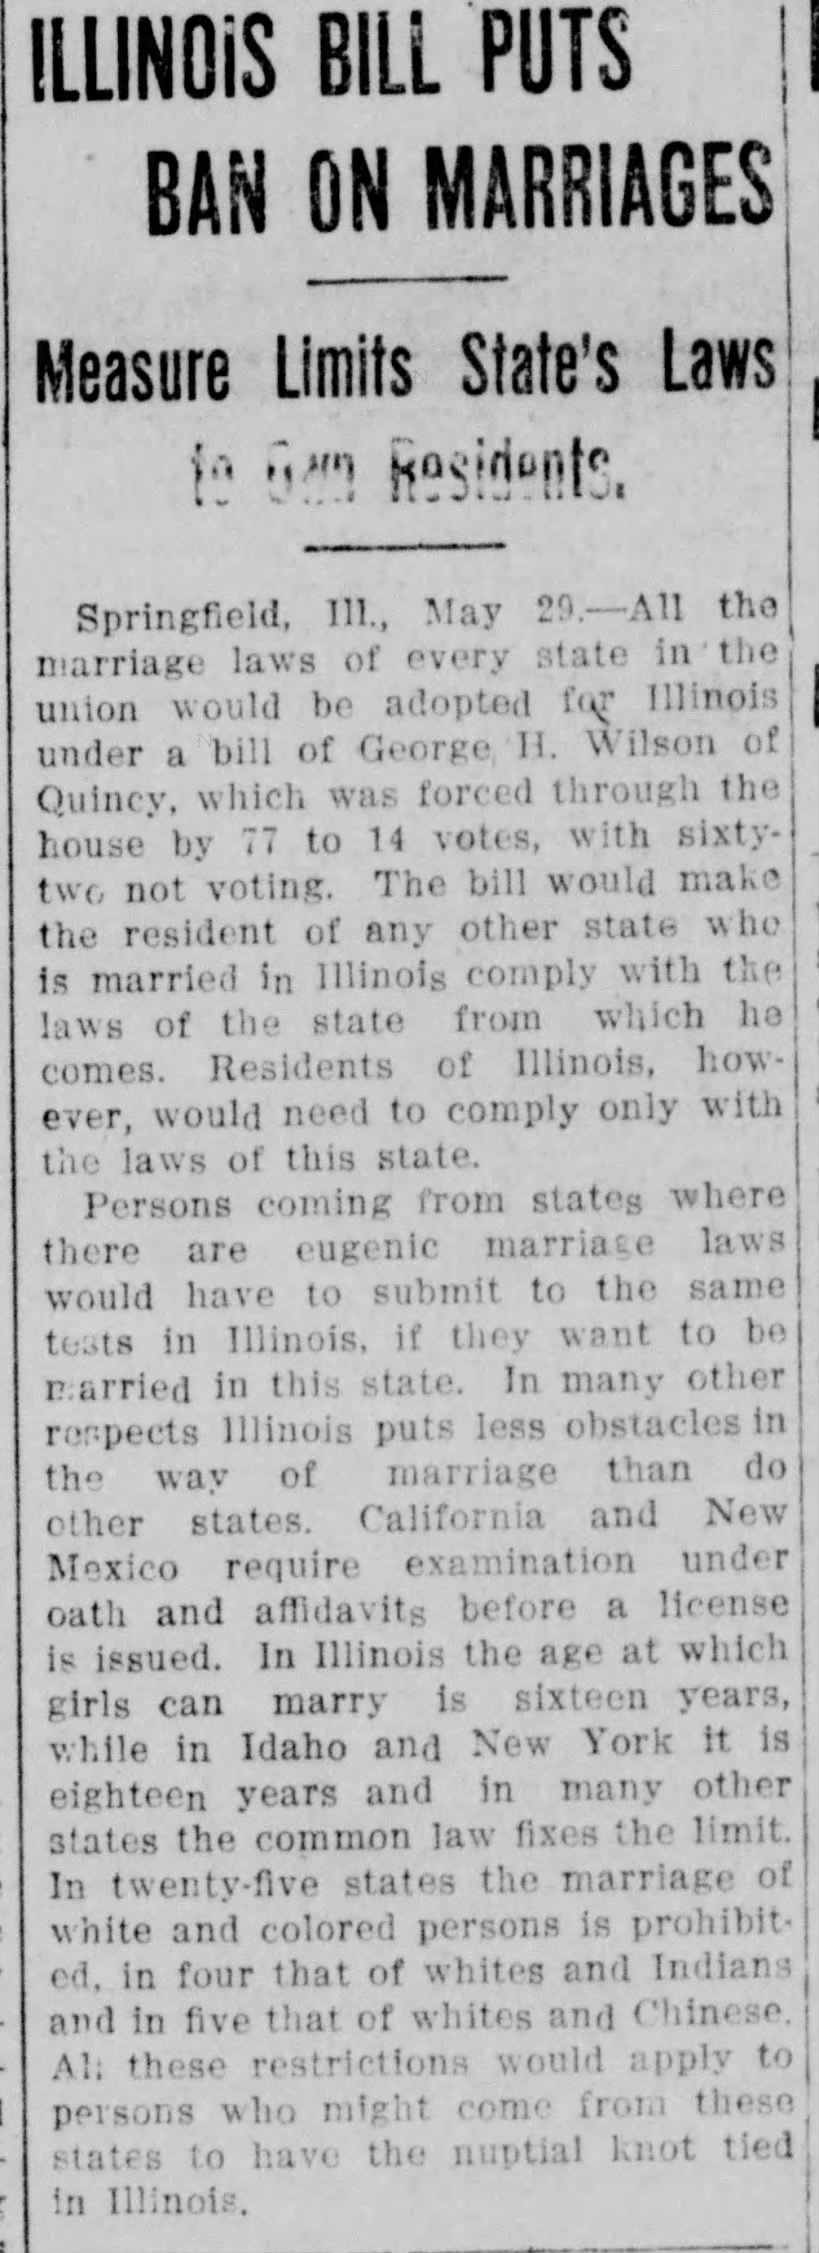 Illinois Bill Puts Ban on Marriages (29 May 1915)